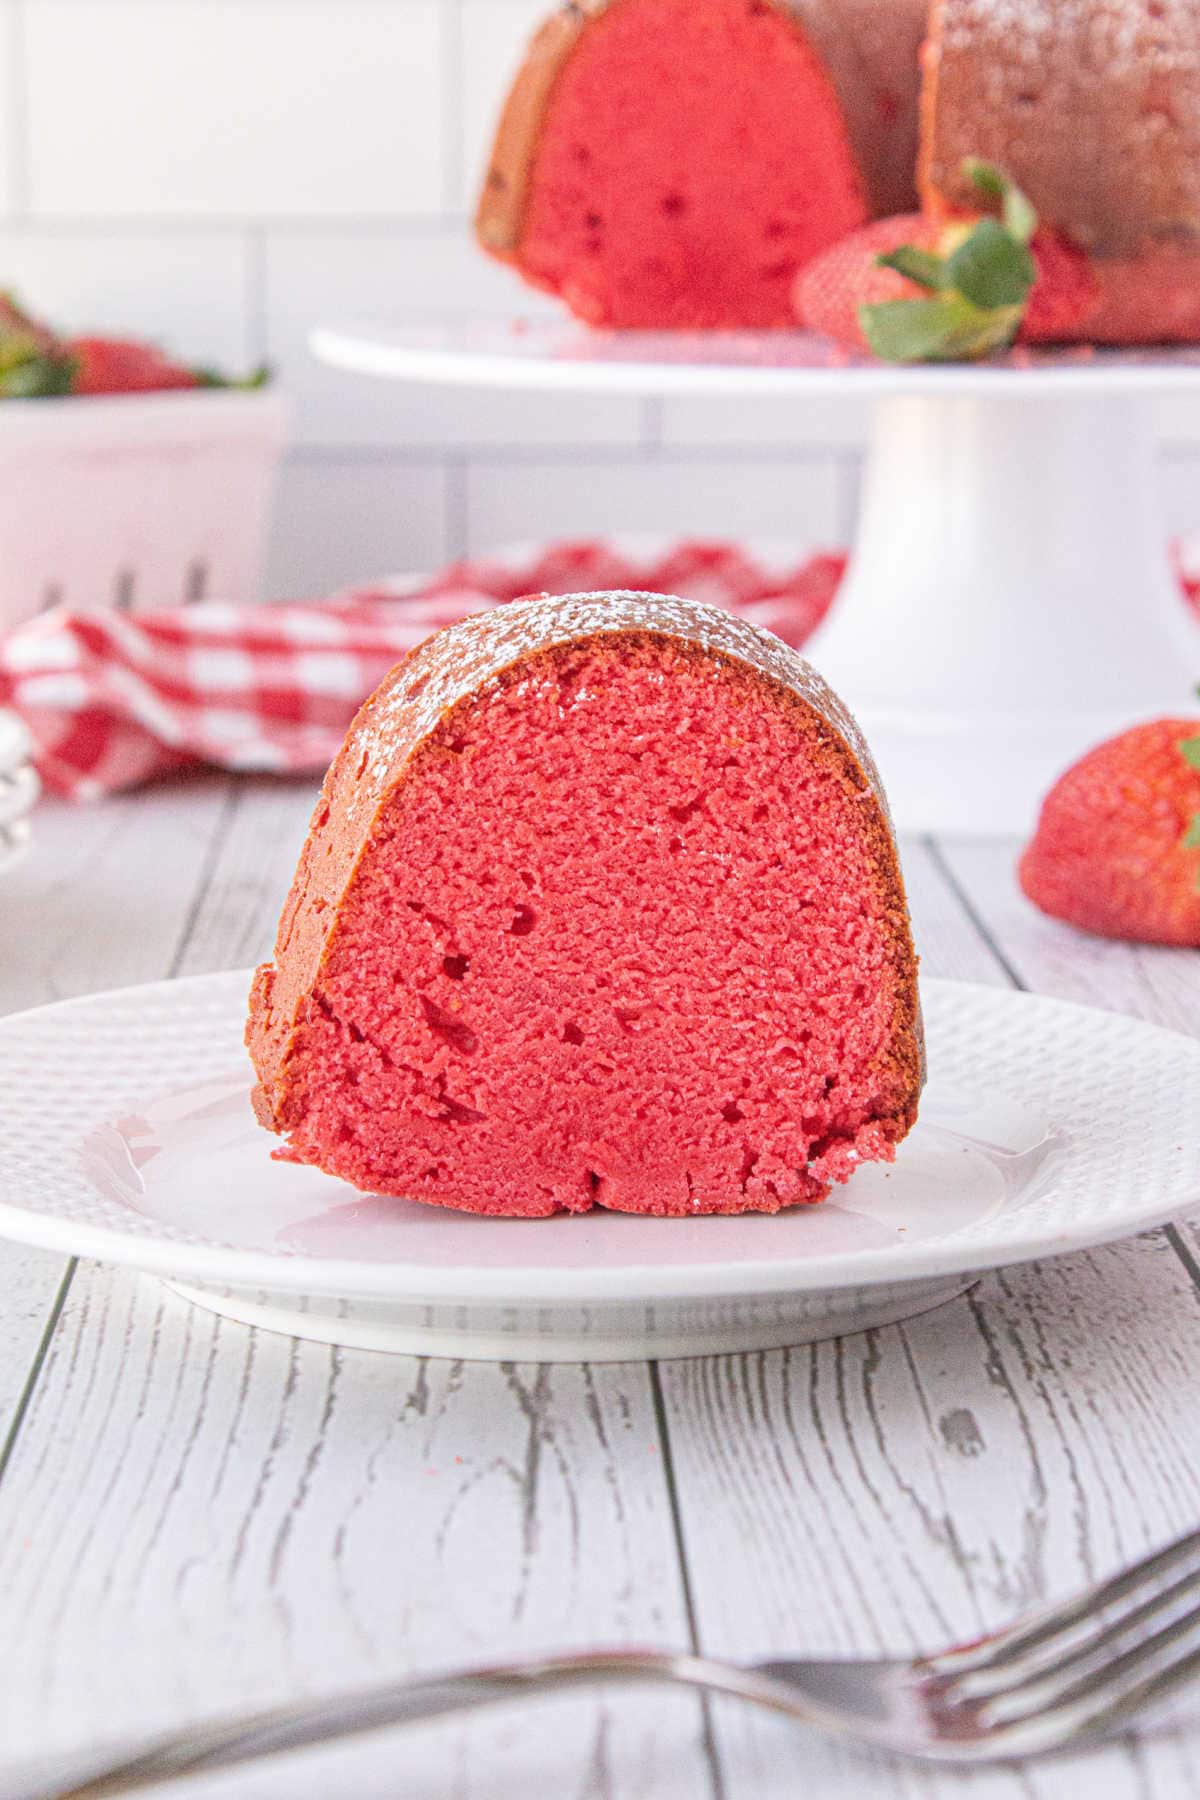 A slice on strawberry bundt cake on a white plate showing the beautiful red coloring of the cake.